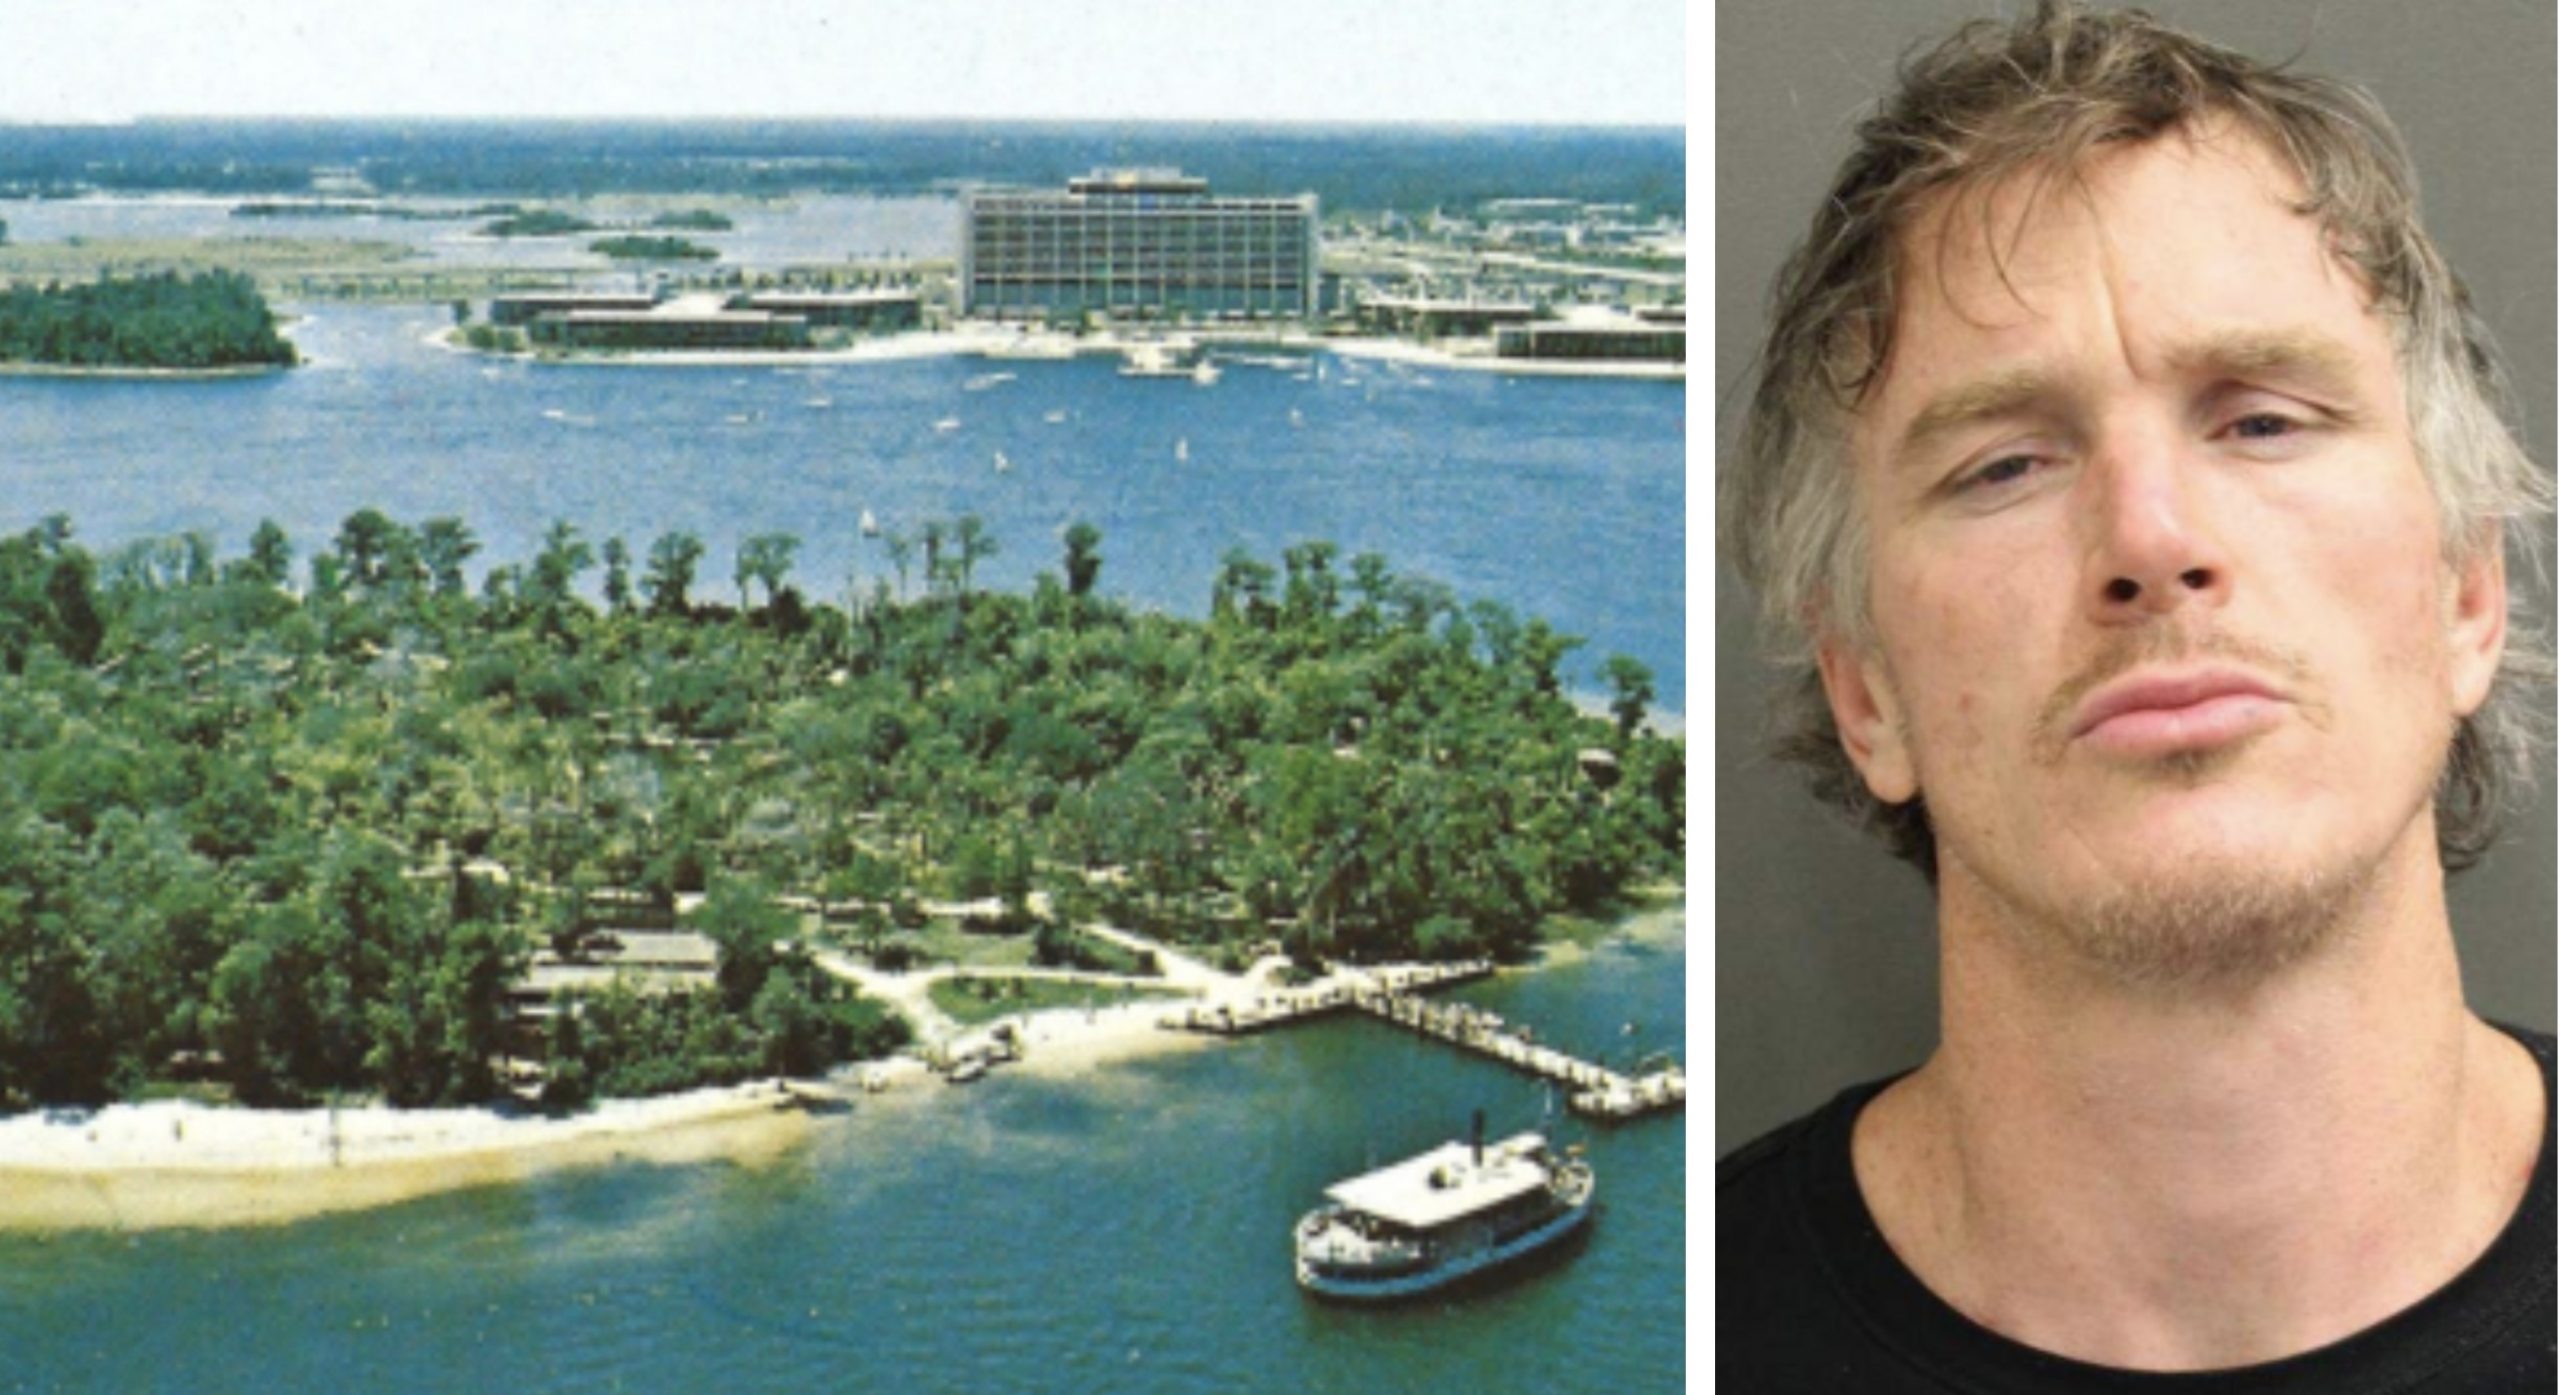 Florida Man officially charged for camping out on Disney’s Discovery Island